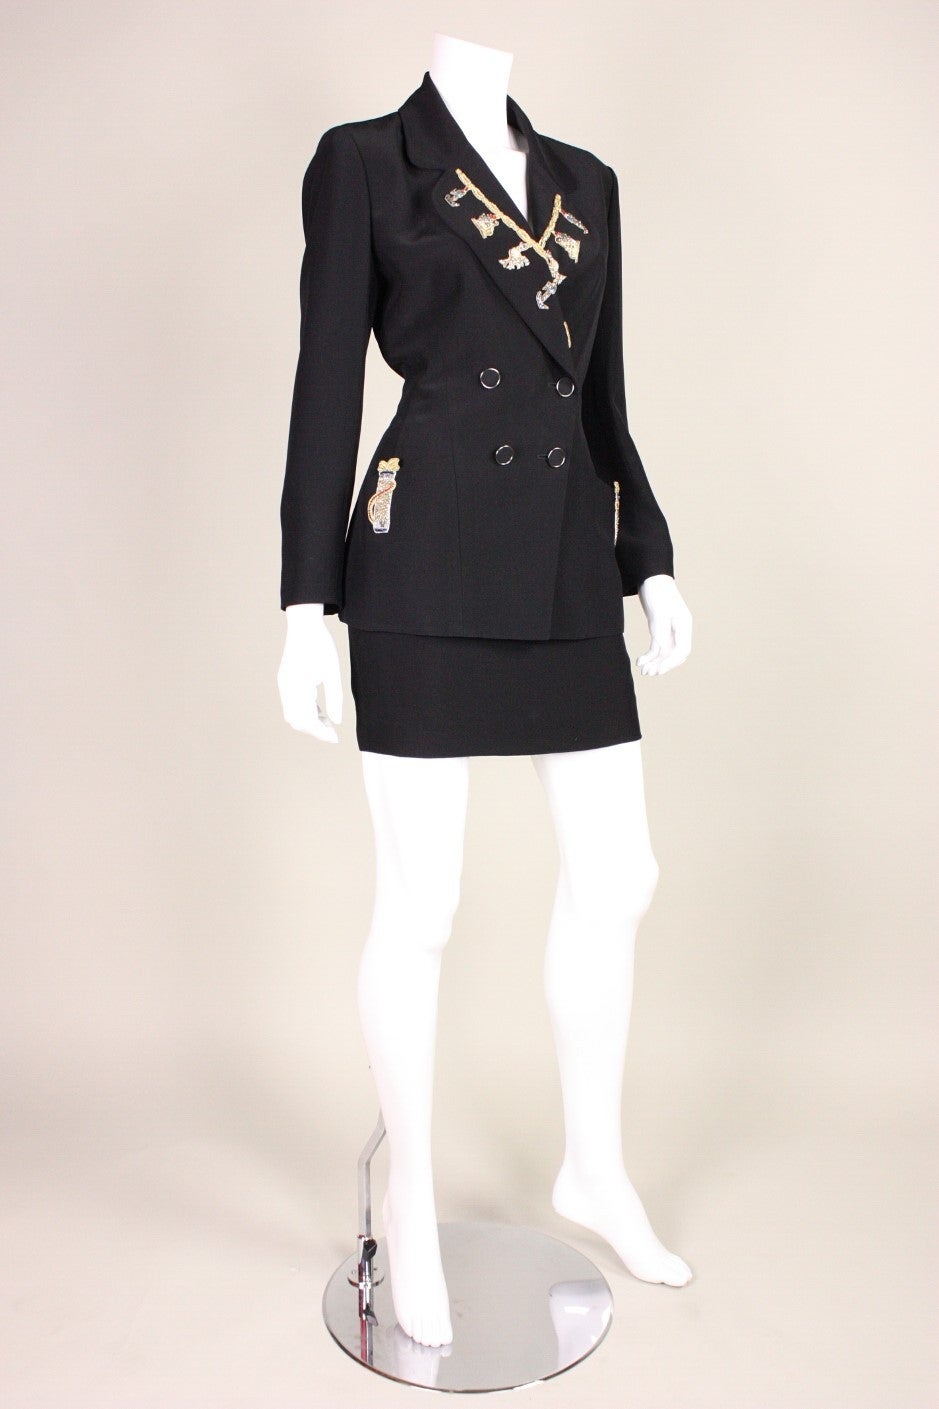 Karl Lagerfeld Embellished Suit, 1990s  In Excellent Condition For Sale In Los Angeles, CA